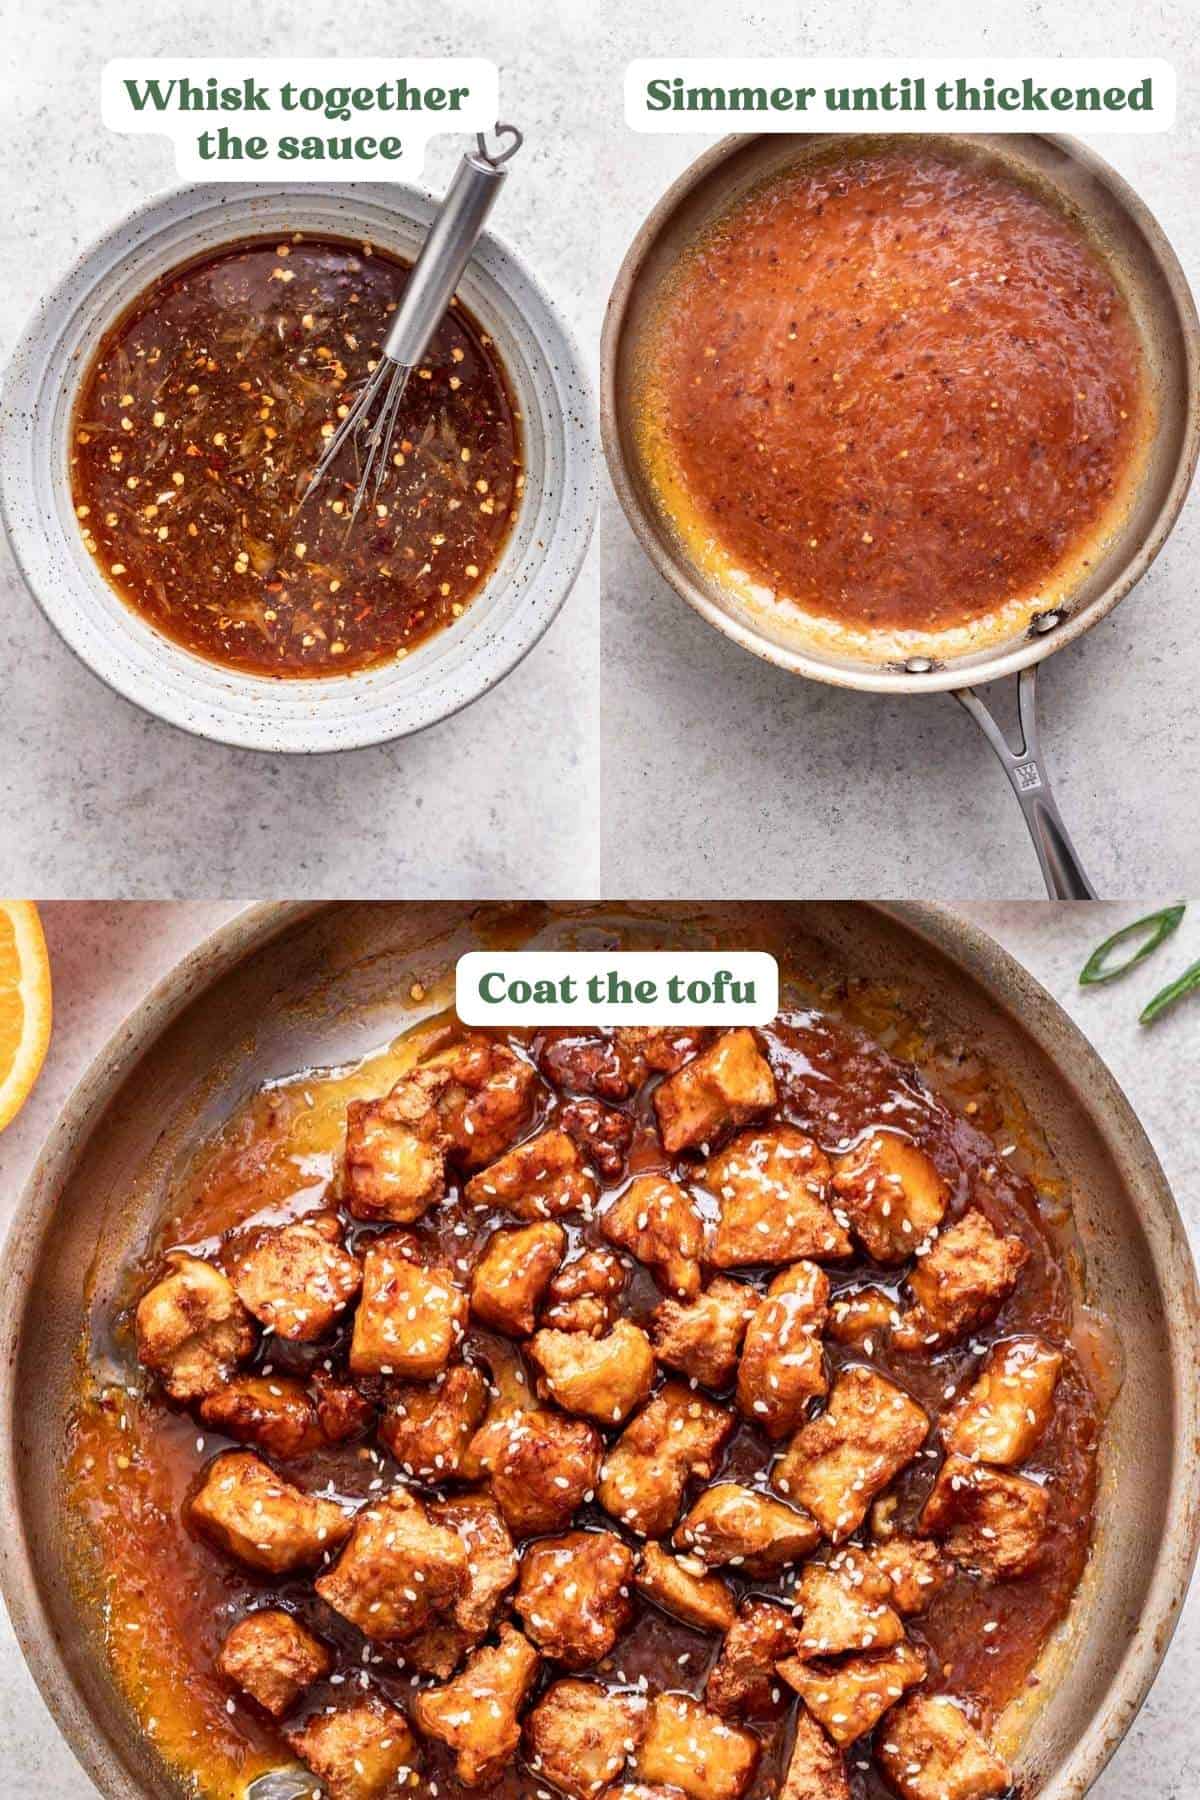 Three images showing how to make and simmer orange sauce.